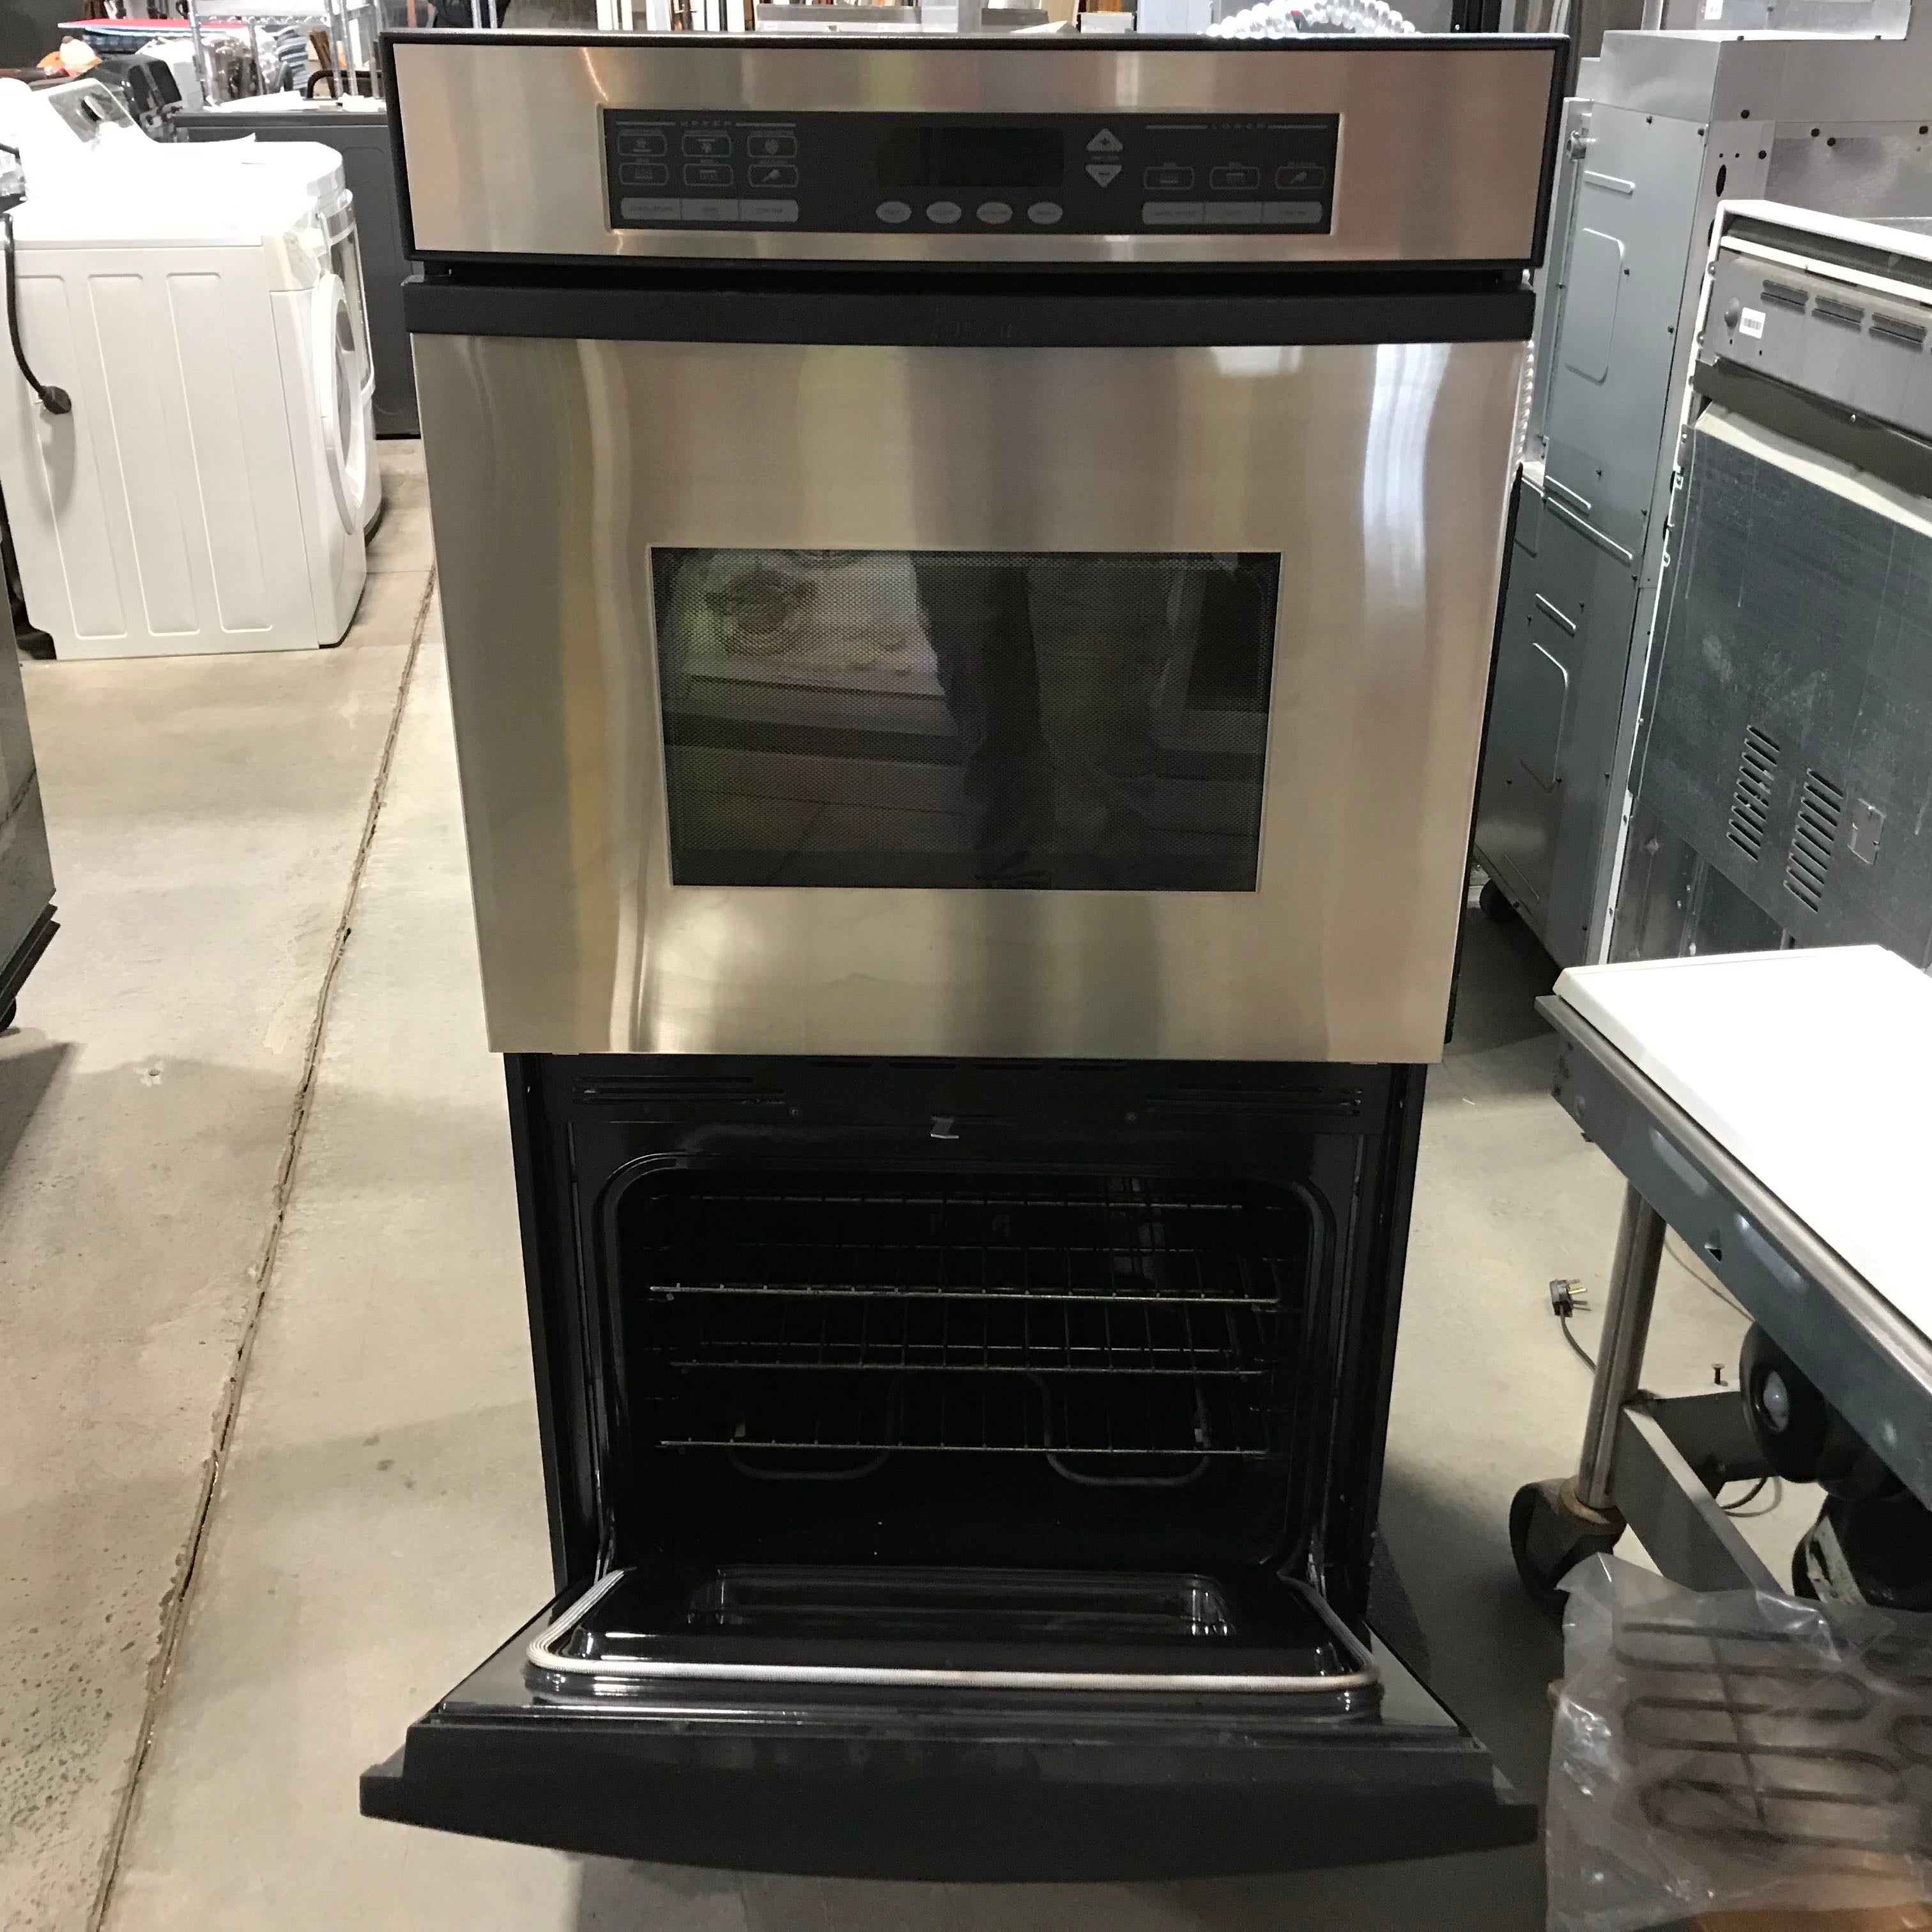 Thermador Stainless Steel Double Oven Wall Oven